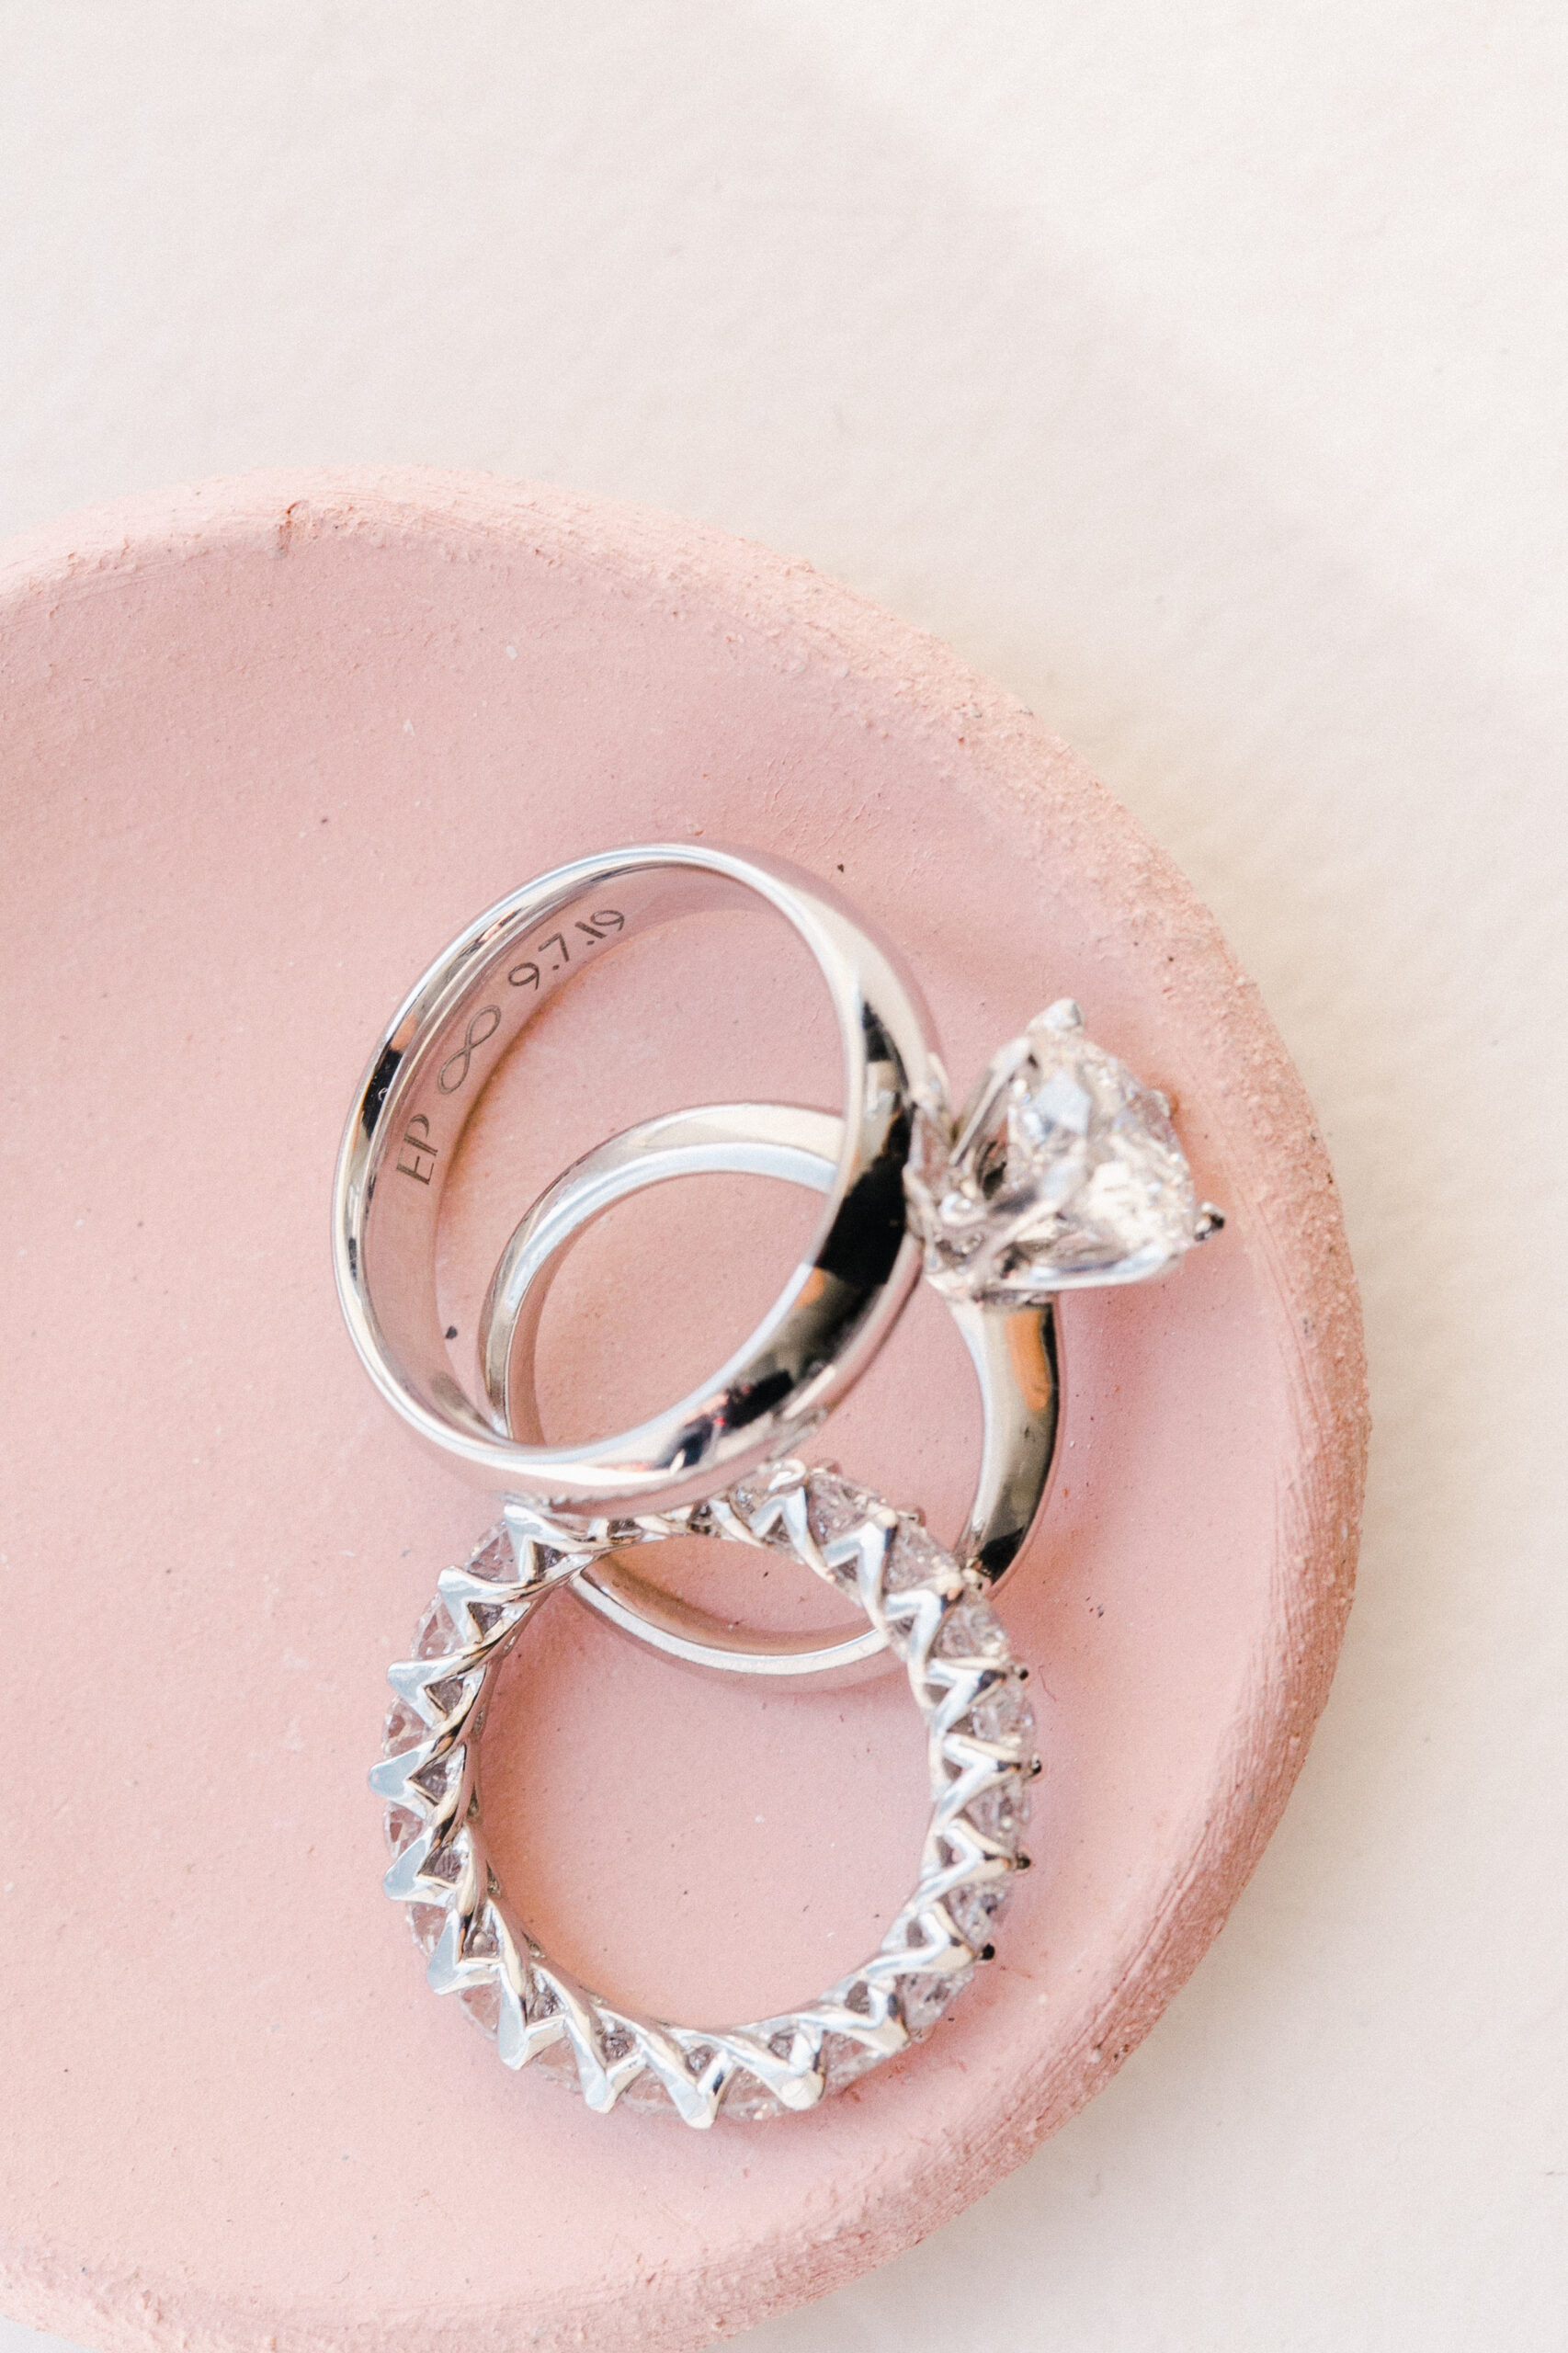 How To Choose Your Dream Engagement Ring